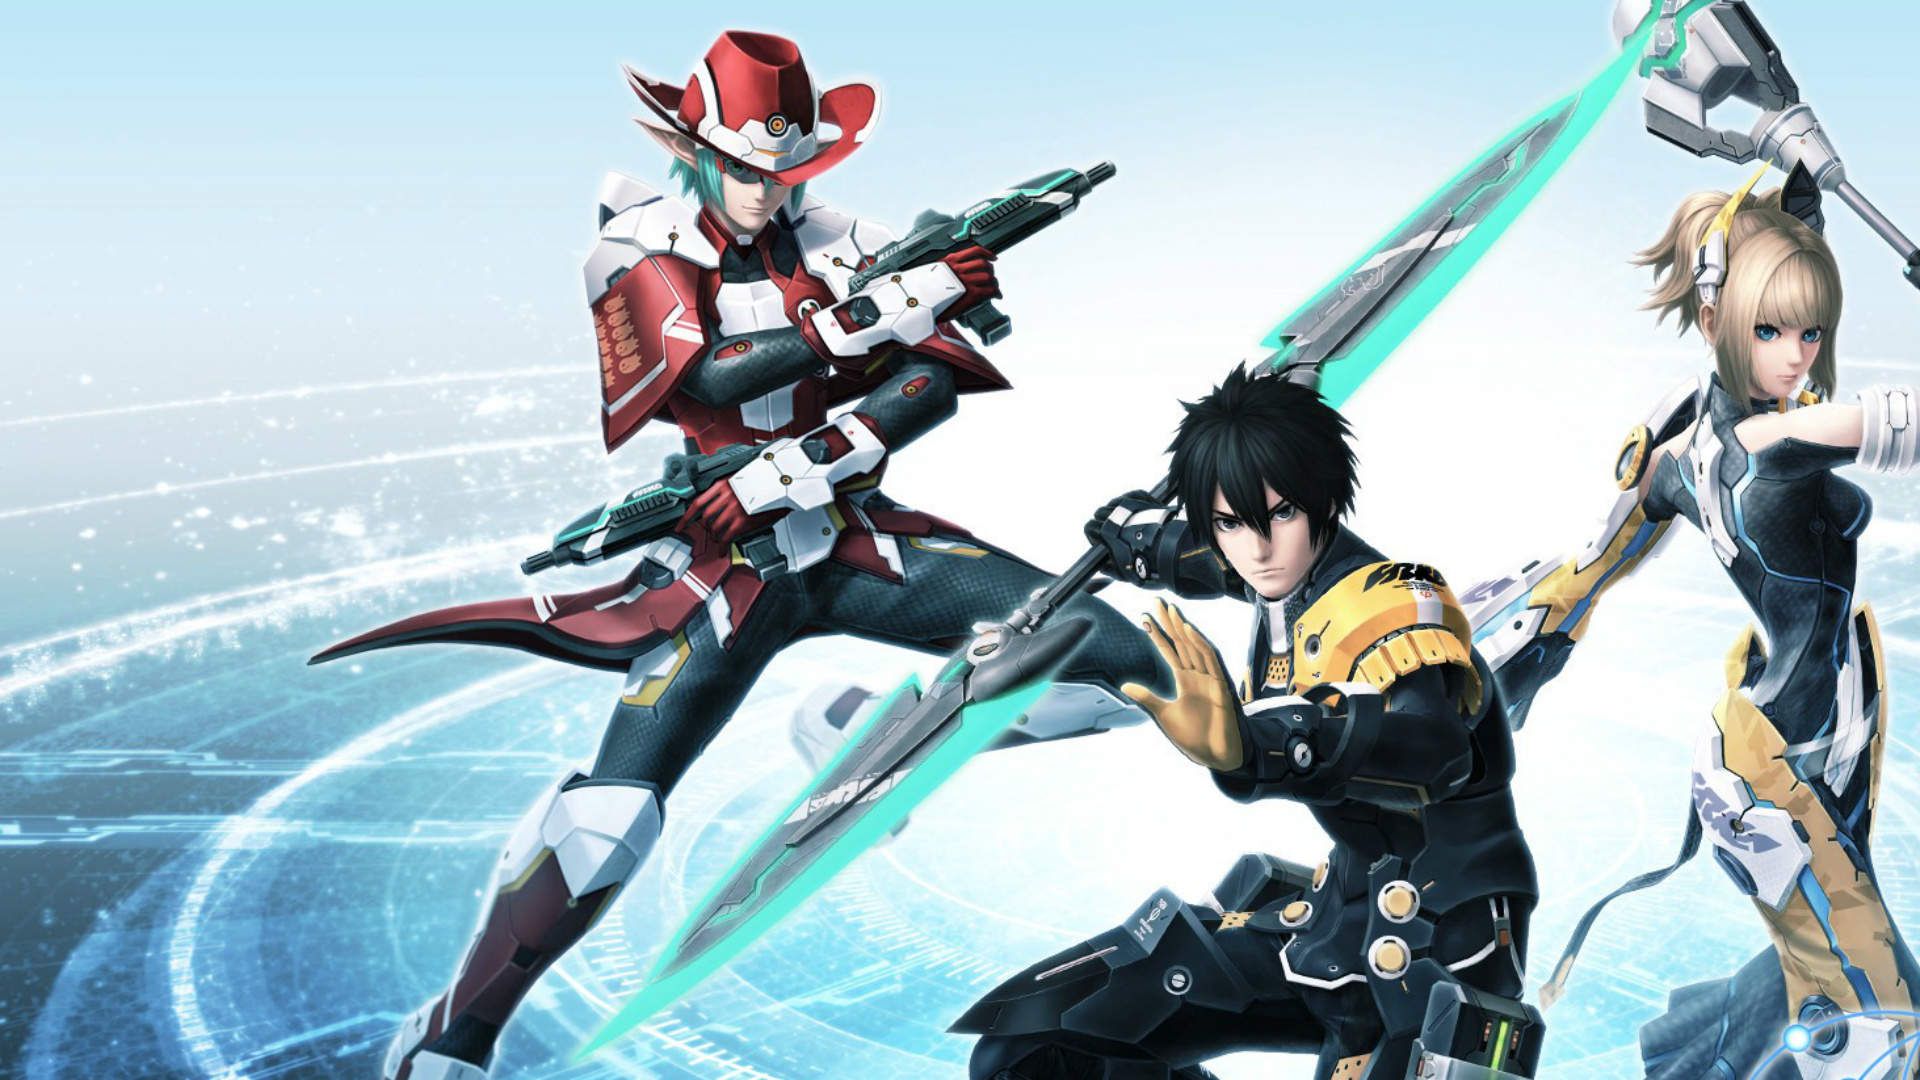 Phantasy Star Online 2: New Genesis could fix the big issues keeping PSO2 from being a killer MMO